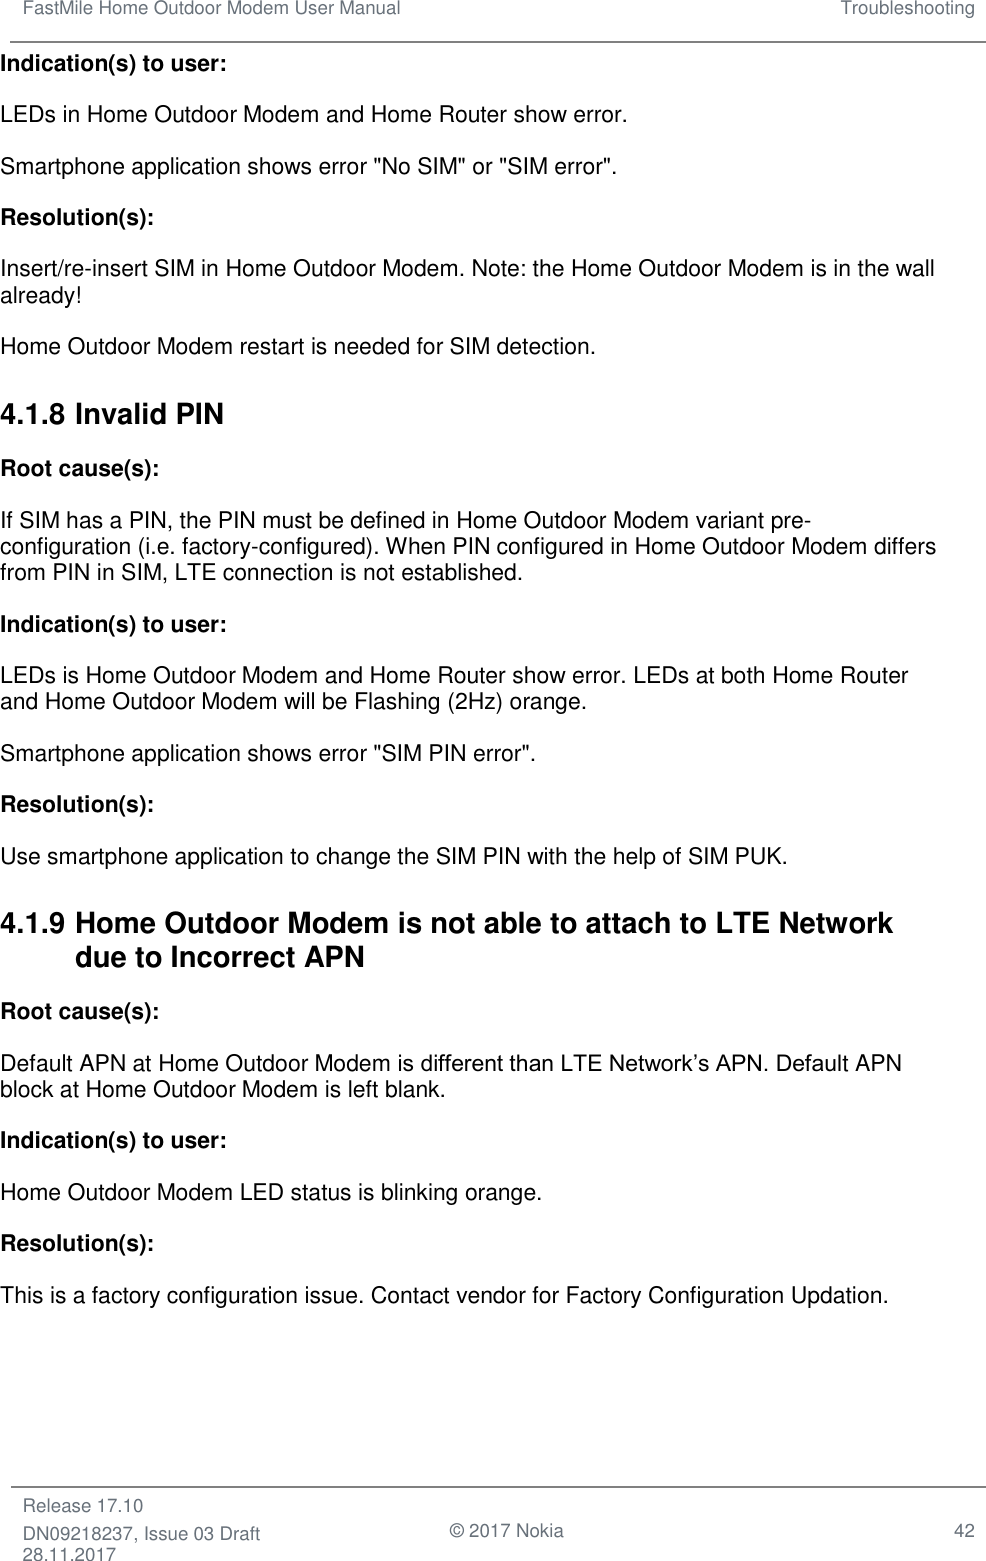 FastMile Home Outdoor Modem User Manual Troubleshooting  Release 17.10 DN09218237, Issue 03 Draft 28.11.2017                                © 2017 Nokia 42  Indication(s) to user:  LEDs in Home Outdoor Modem and Home Router show error. Smartphone application shows error &quot;No SIM&quot; or &quot;SIM error&quot;. Resolution(s): Insert/re-insert SIM in Home Outdoor Modem. Note: the Home Outdoor Modem is in the wall already! Home Outdoor Modem restart is needed for SIM detection. 4.1.8 Invalid PIN Root cause(s):  If SIM has a PIN, the PIN must be defined in Home Outdoor Modem variant pre-configuration (i.e. factory-configured). When PIN configured in Home Outdoor Modem differs from PIN in SIM, LTE connection is not established. Indication(s) to user:  LEDs is Home Outdoor Modem and Home Router show error. LEDs at both Home Router and Home Outdoor Modem will be Flashing (2Hz) orange. Smartphone application shows error &quot;SIM PIN error&quot;. Resolution(s):  Use smartphone application to change the SIM PIN with the help of SIM PUK. 4.1.9 Home Outdoor Modem is not able to attach to LTE Network due to Incorrect APN Root cause(s): Default APN at Home Outdoor Modem is different than LTE Network’s APN. Default APN block at Home Outdoor Modem is left blank. Indication(s) to user: Home Outdoor Modem LED status is blinking orange. Resolution(s): This is a factory configuration issue. Contact vendor for Factory Configuration Updation. 